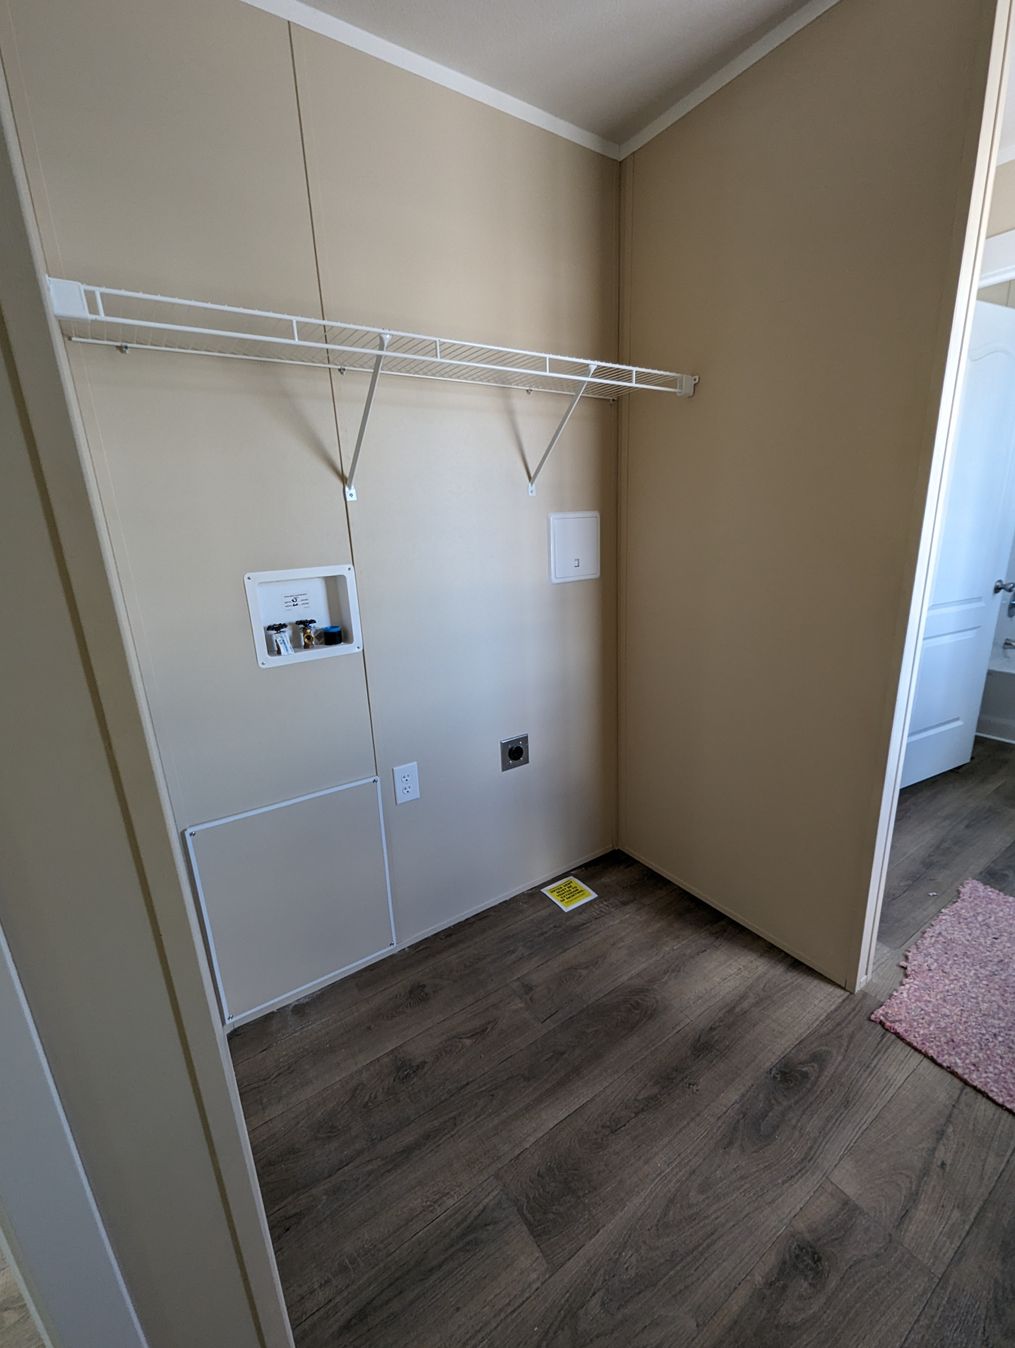 Utility room for washer and dryer with wire shelving.